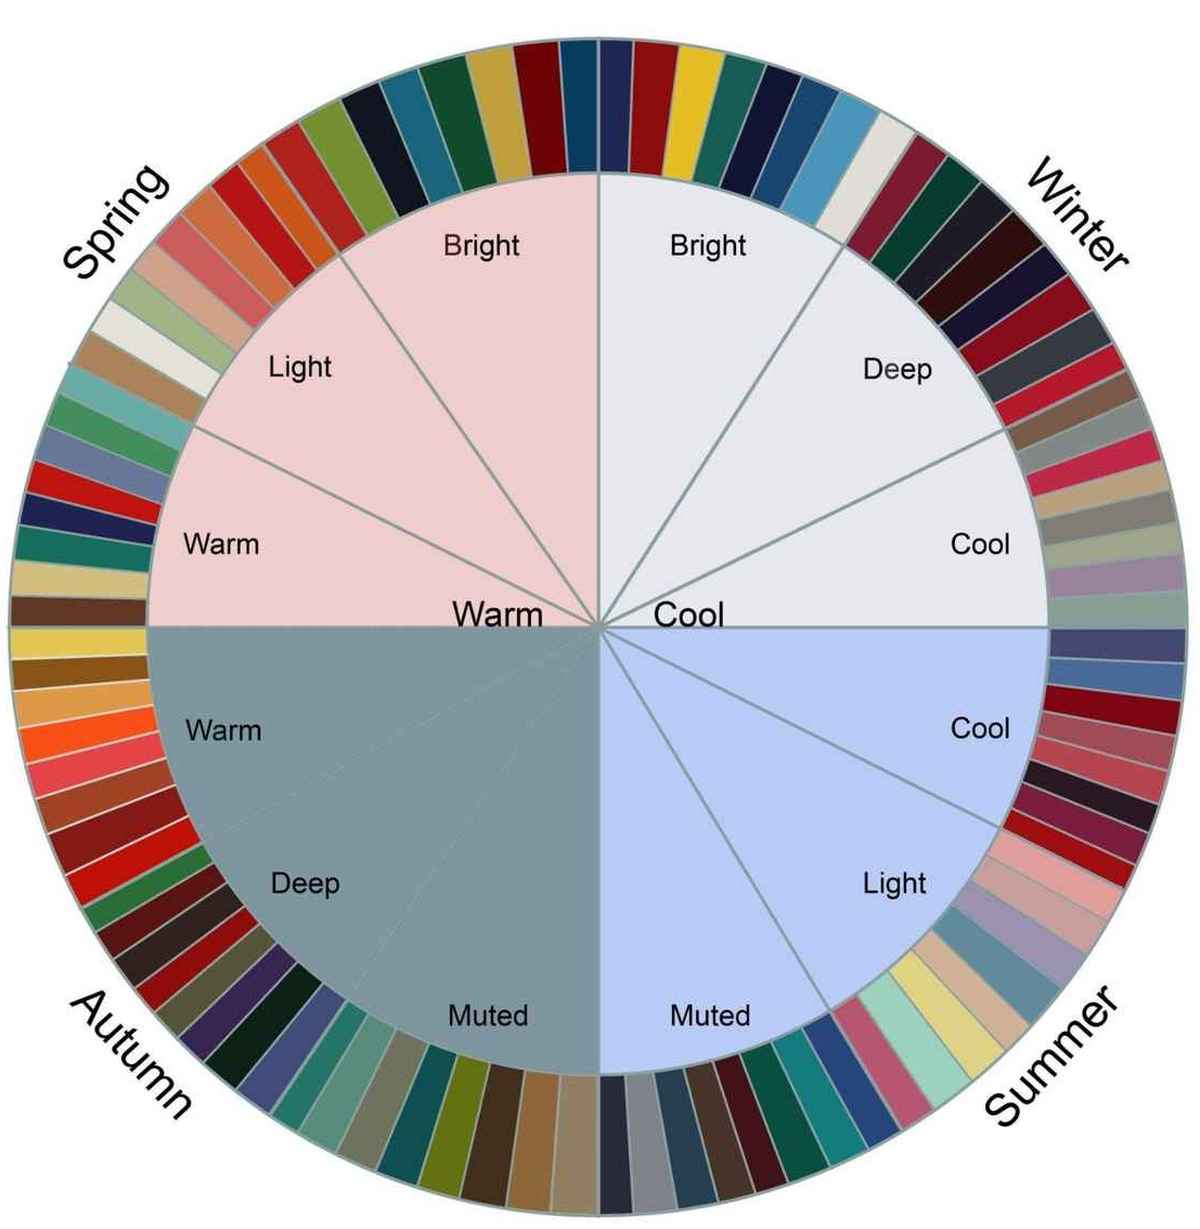 color wheel categorized by seasons and temperature